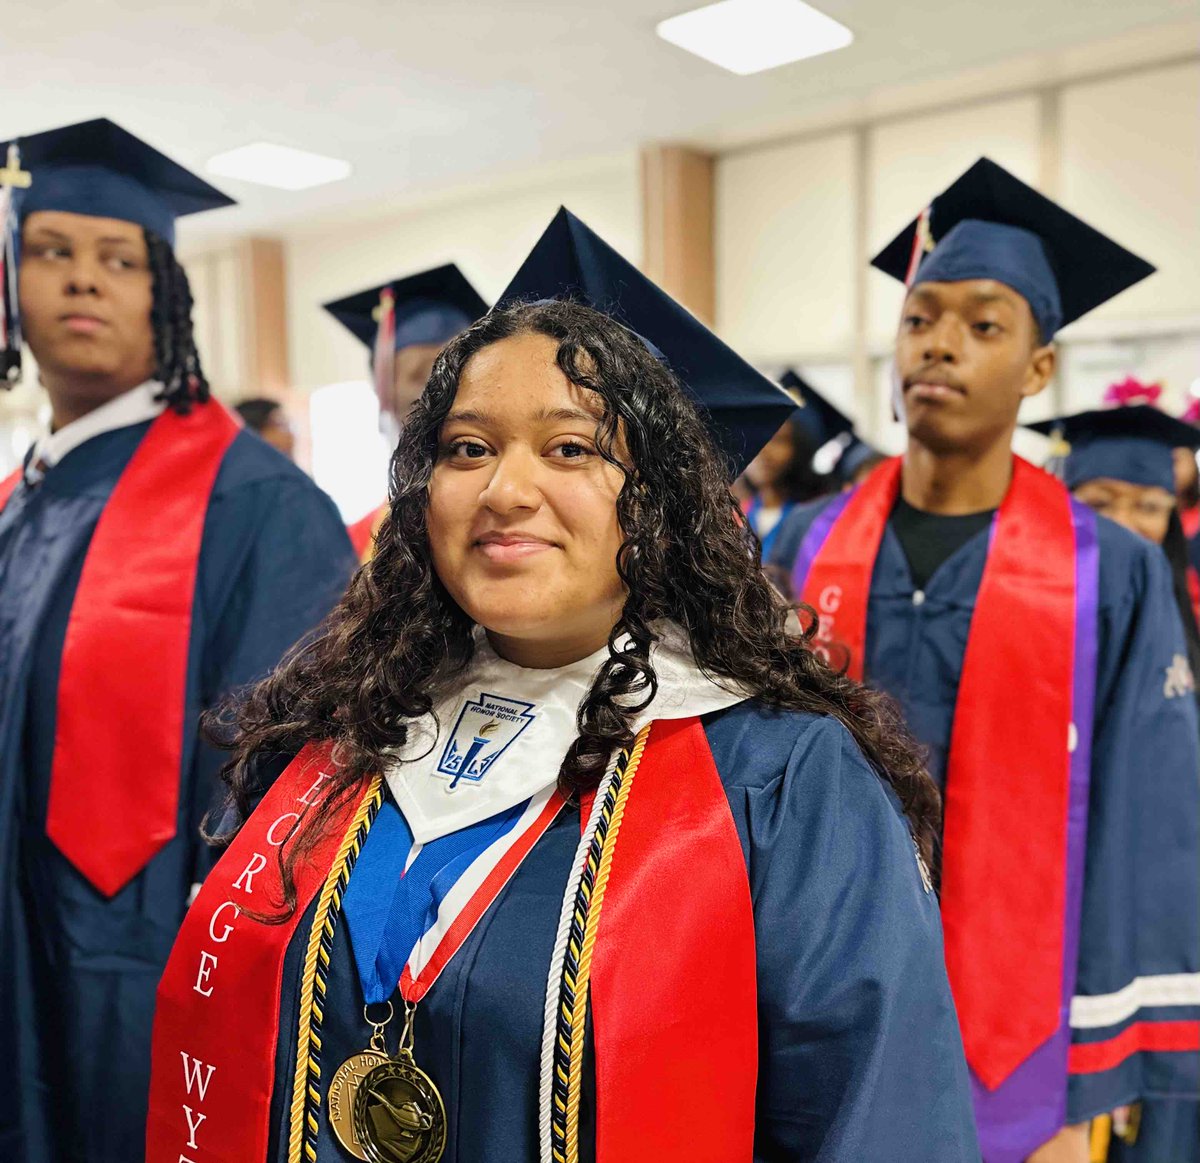 The Bulldogs are ready to walk across the stage! Join us for the final graduation ceremony for the Class of 2023 by watching along at gwhs.rvaschools.net/programs-activ…